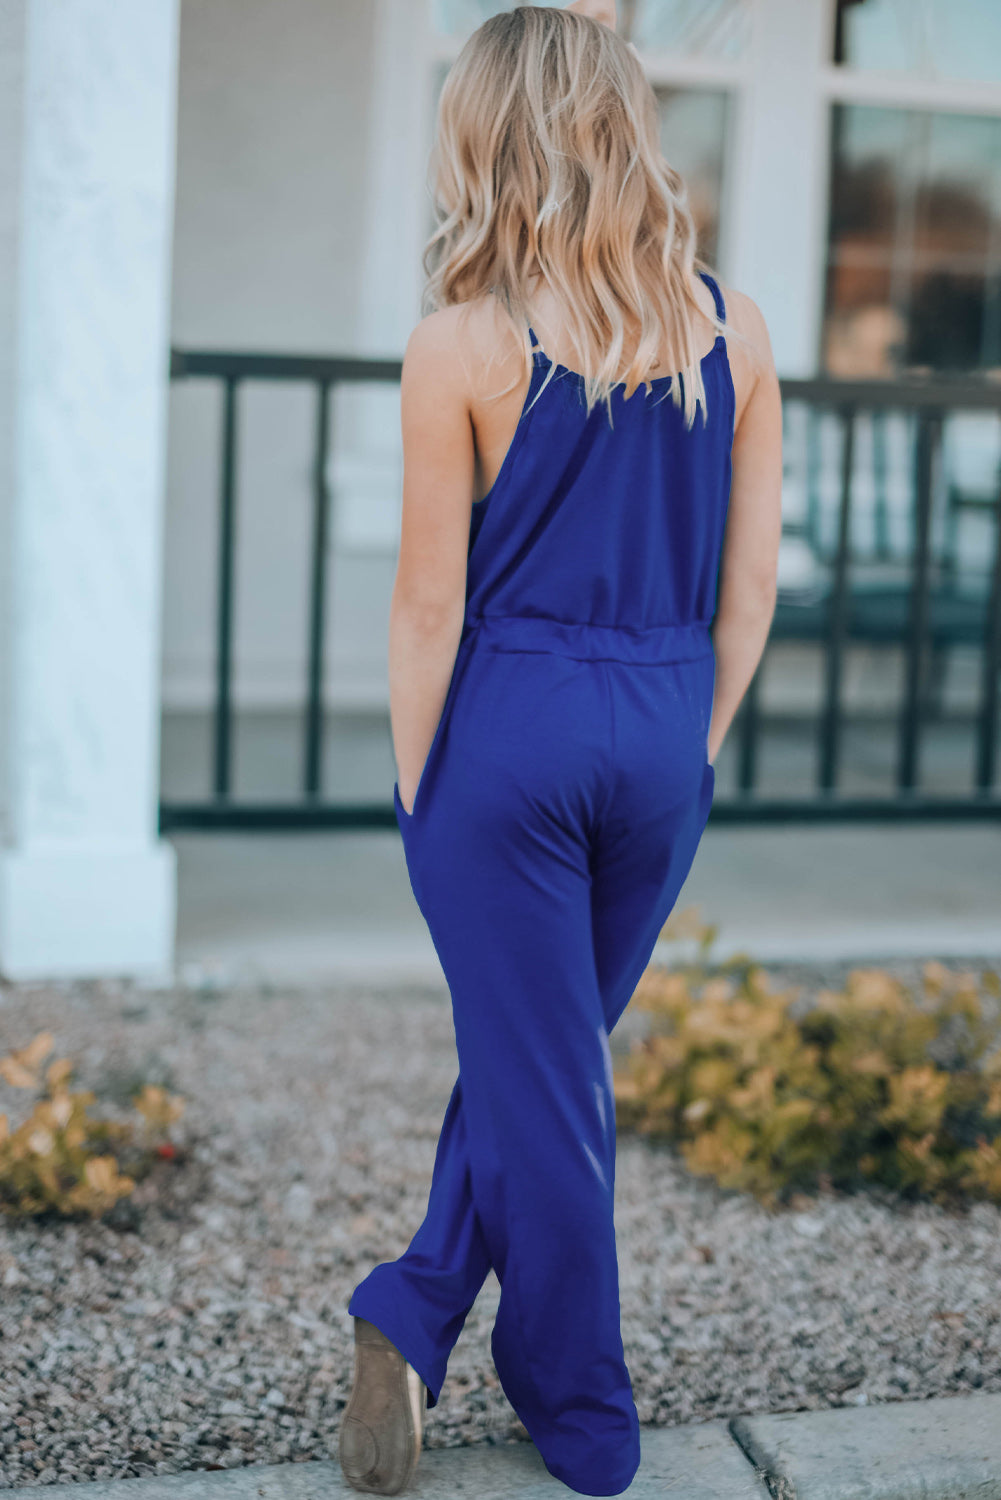 Women's Striped One Piece Jumpsuit with Spaghetti Straps - Royal Blue